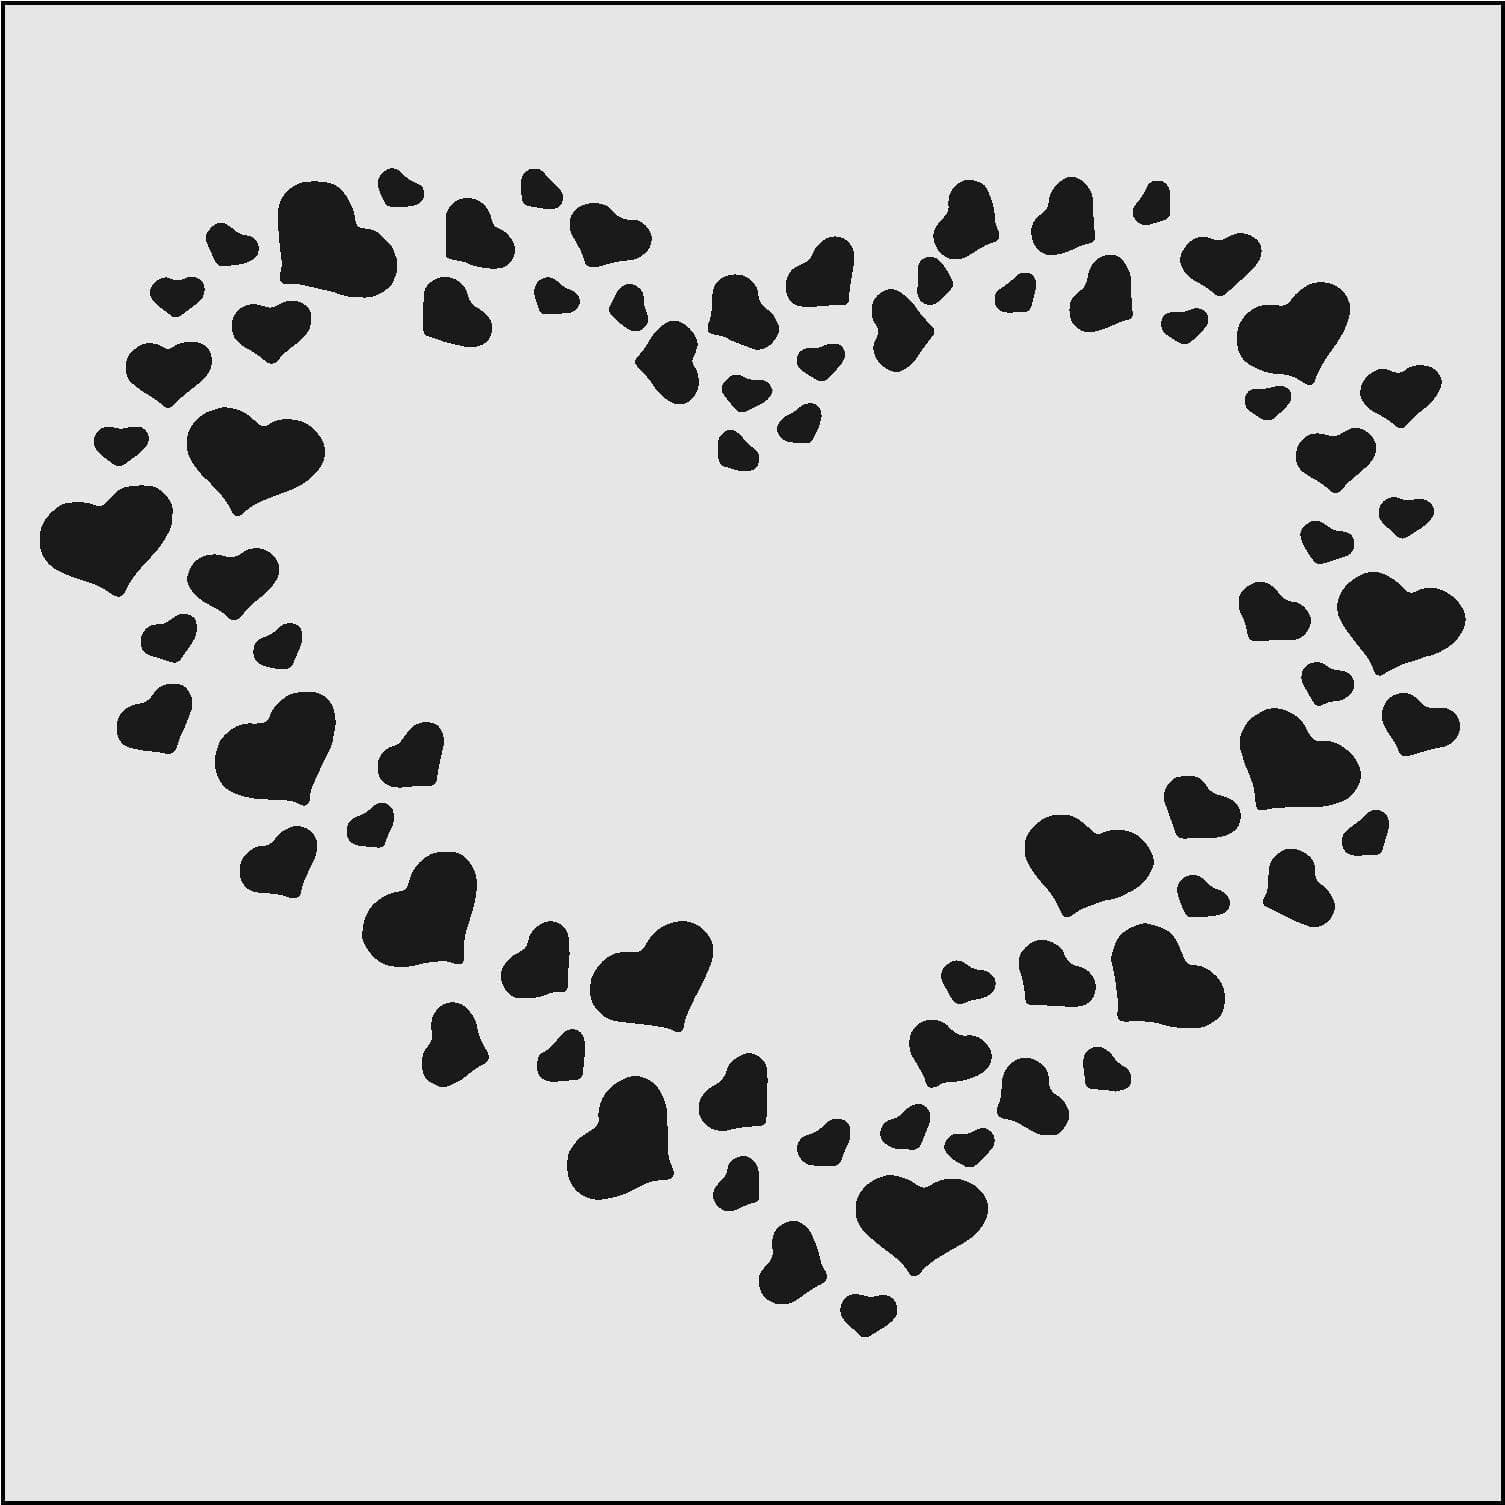 Shop 5x5 Hearts in a Heart Print Stencils from $4.89 - Bakell